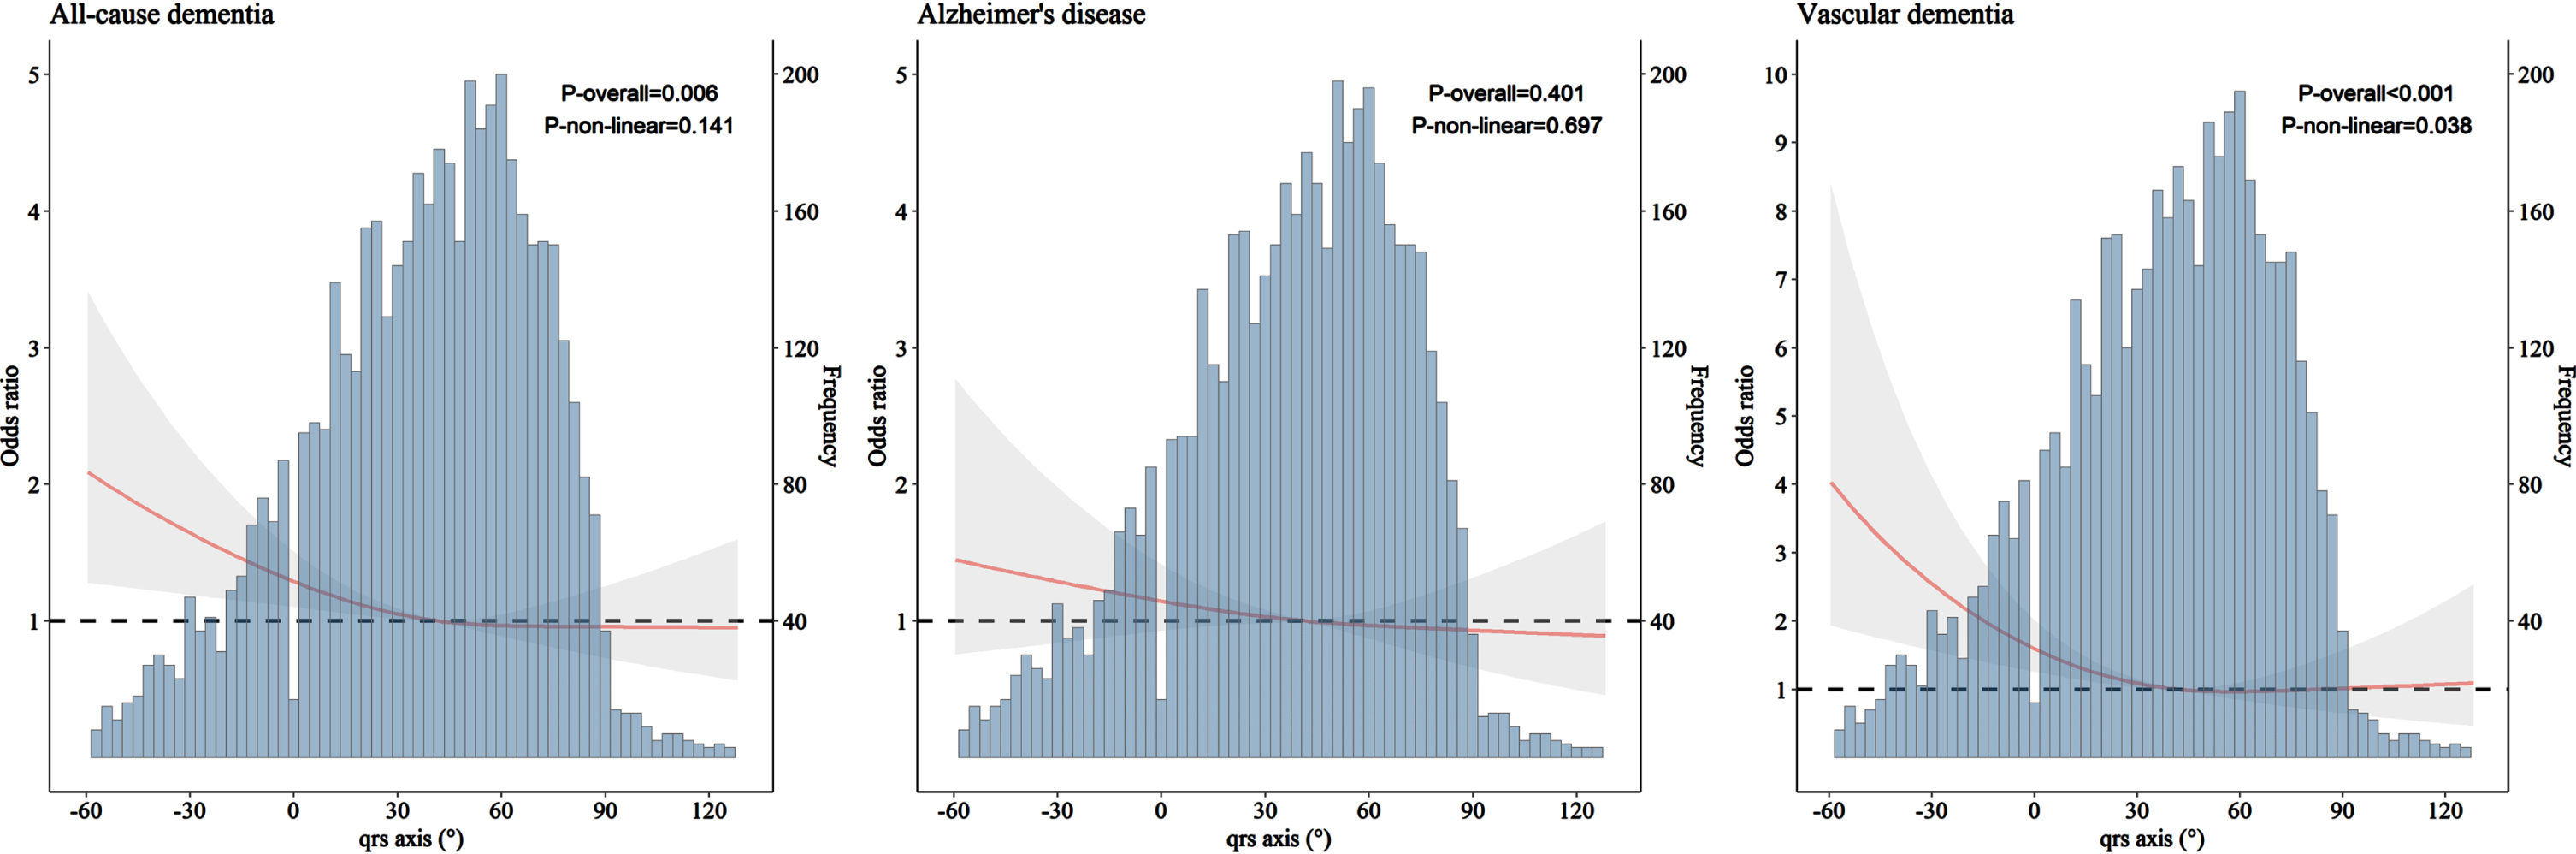 Association of QRS axis with all-cause dementia, Alzheimer’s disease, and vascular dementia derived from restricted cubic spline models (n = 5,153). Restricted cubic spline models were adjusted for age, sex, education, APOE genotype, smoking status, alcohol intake, body mass index, the number of chronic diseases, and use of anti-thrombotic agents, cardiac agents, and QT prolonging drugs.